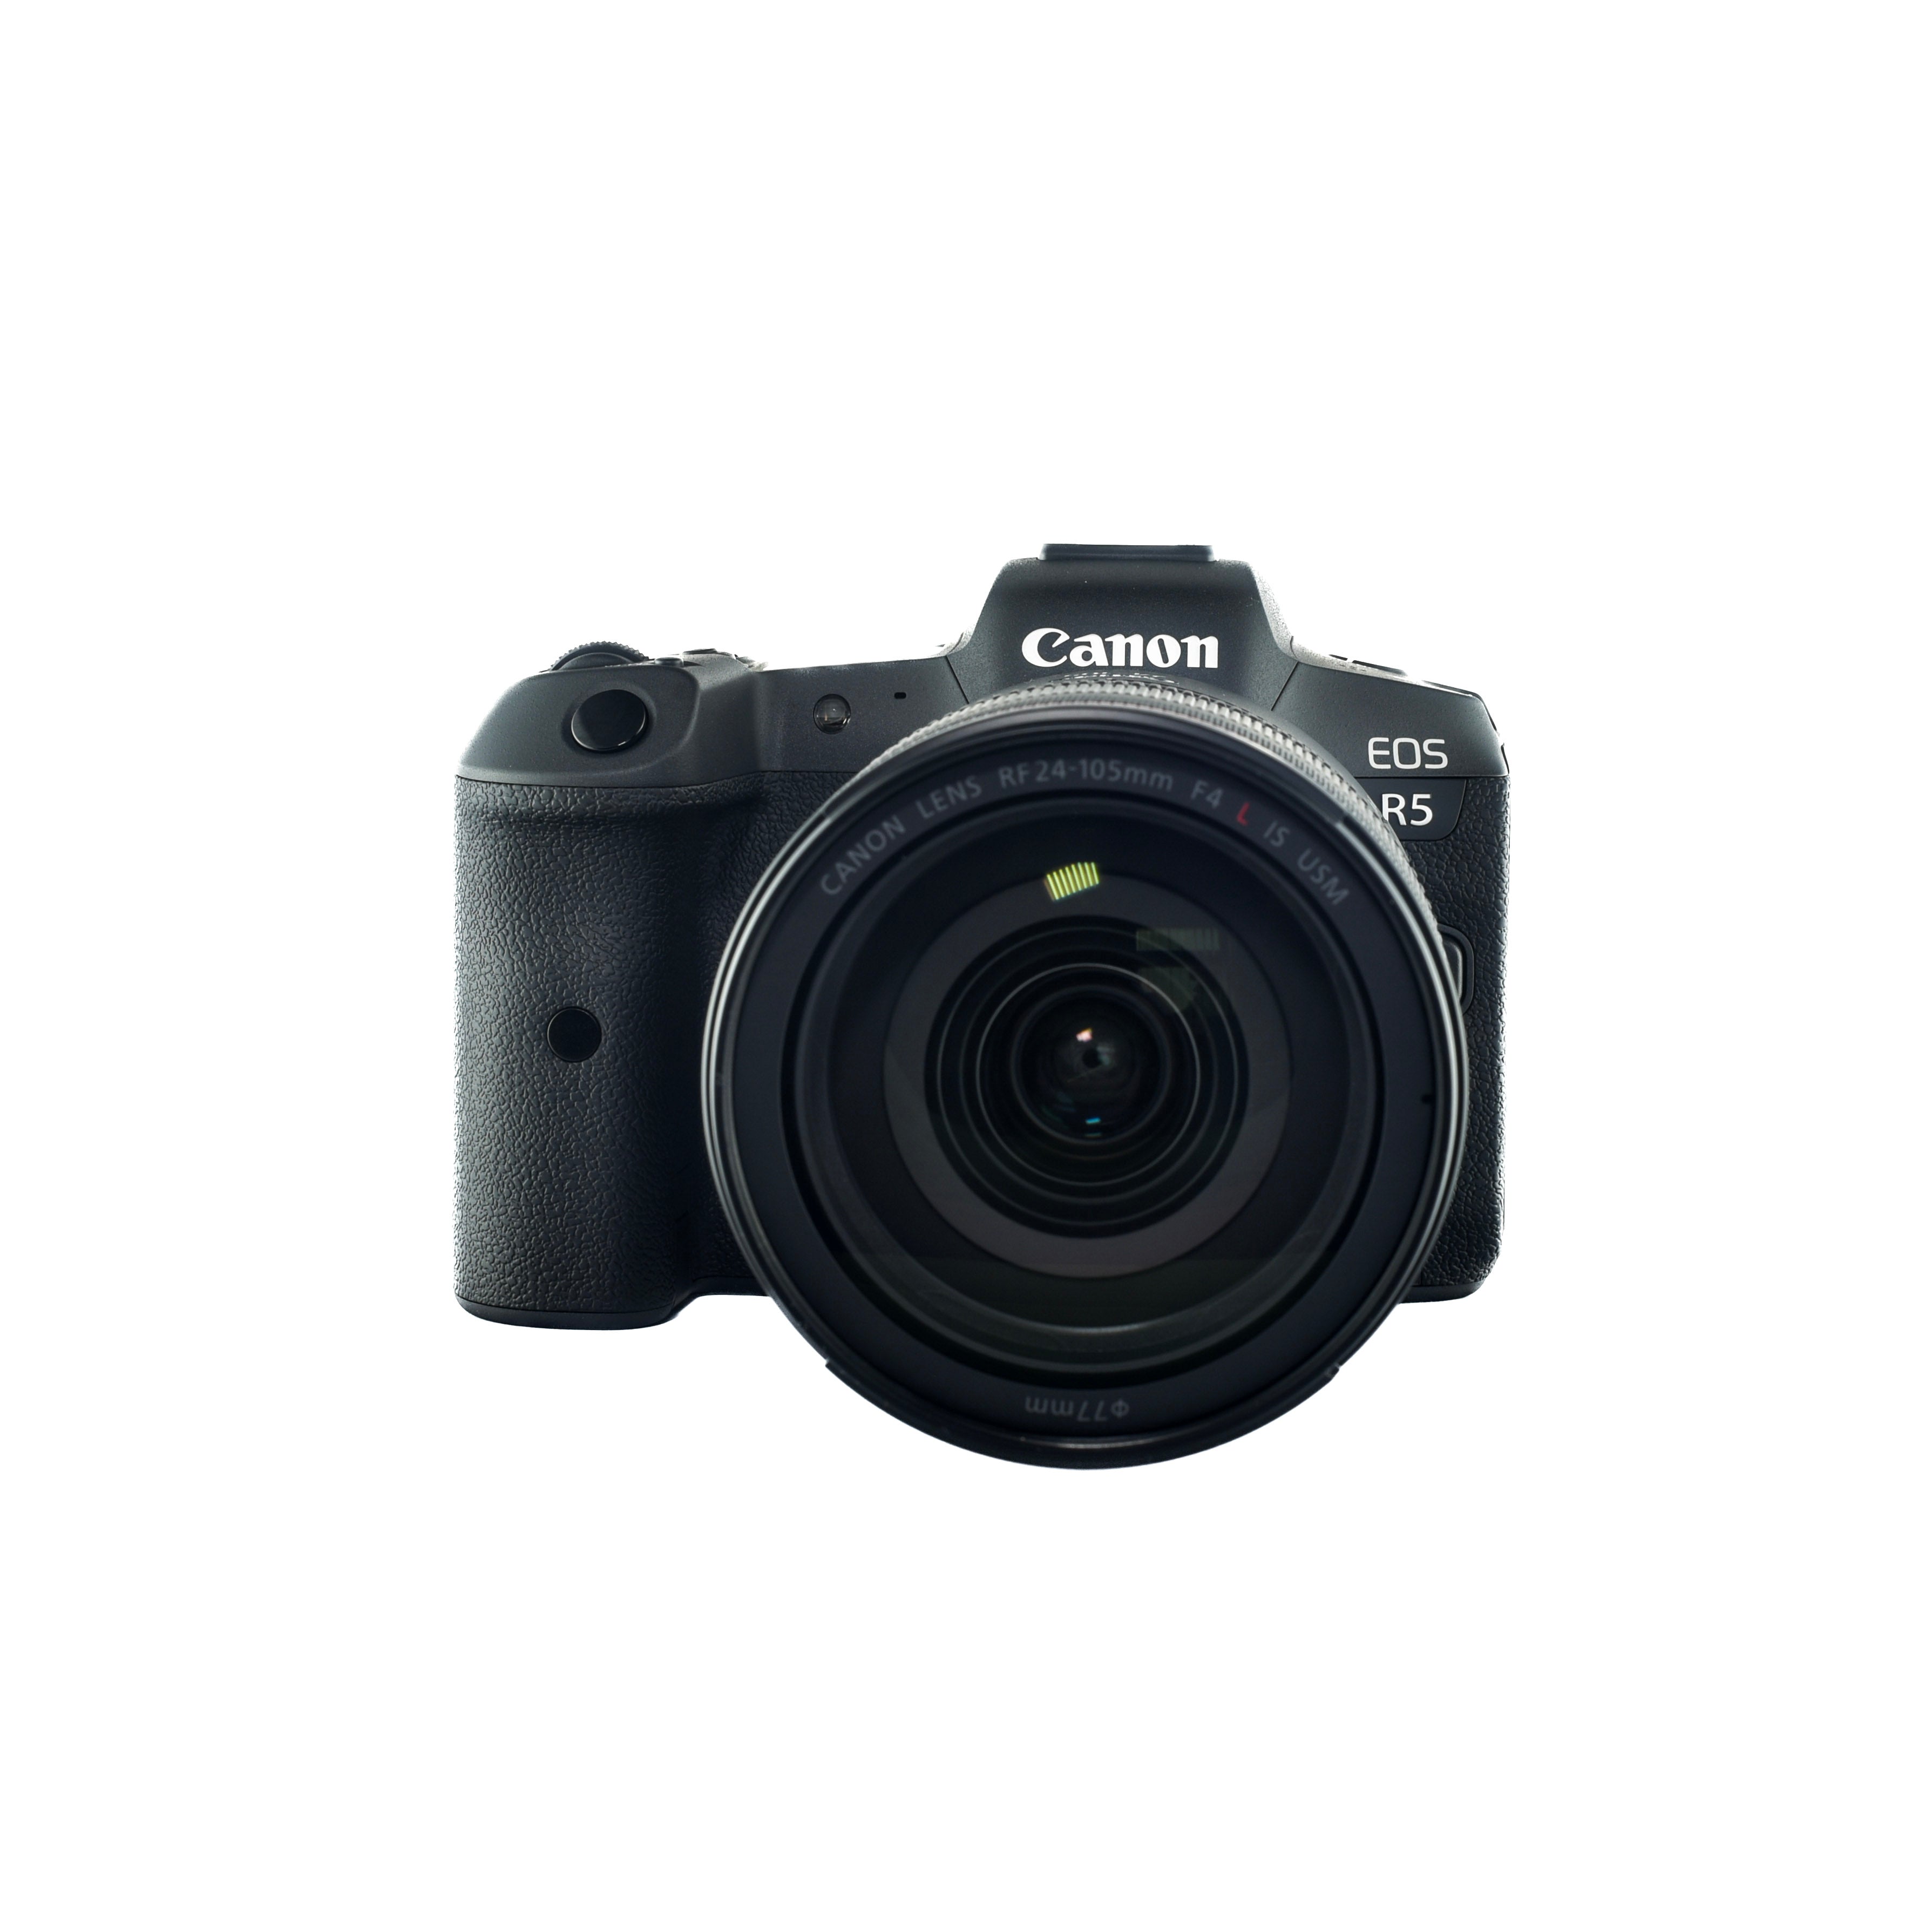 Canon - EOS R5 Mirrorless Digital Camera with 24-105mm f/4L Lens